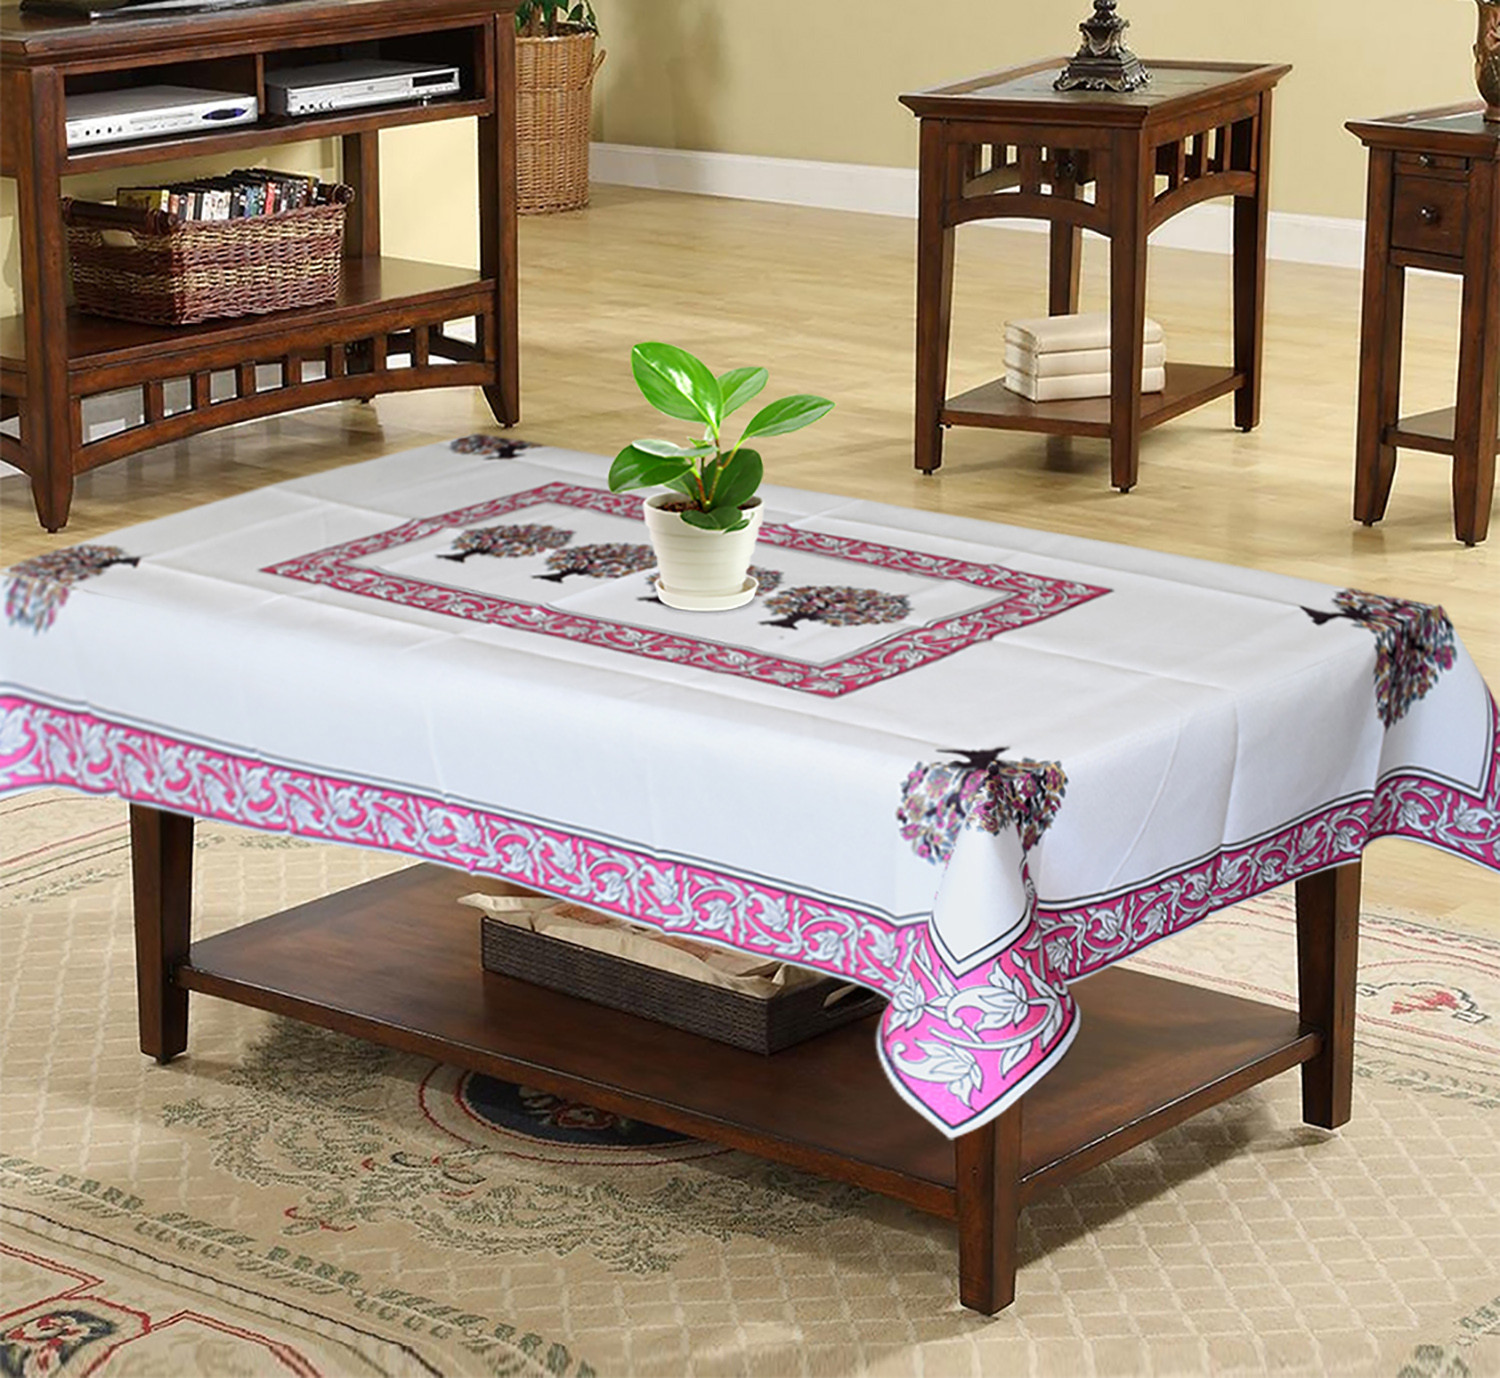 Kuber Industries Floral Print Polyester Center Table Cover/Table Cloth For Home Decorative Luxurious 4 Seater, 60